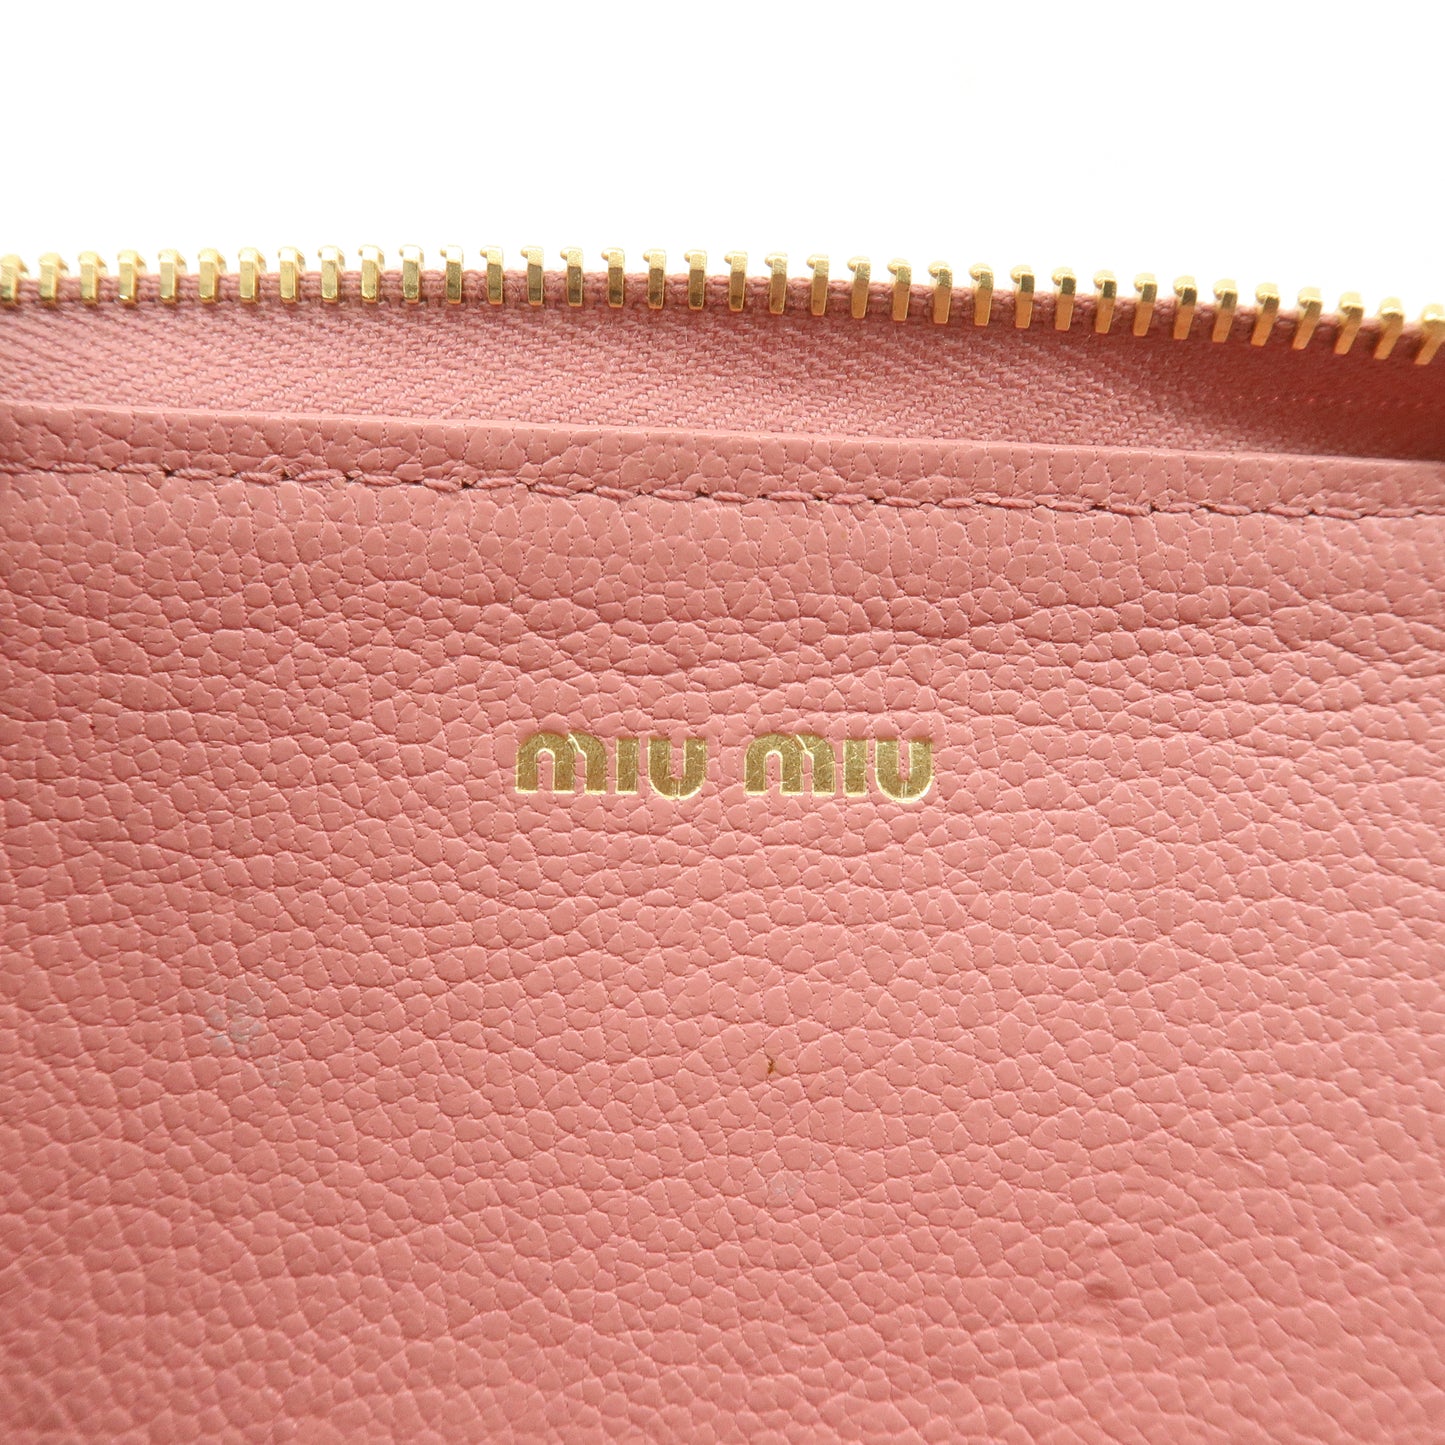 MIU MIU Leather Coin Case Key Pouch Pink 5PP026